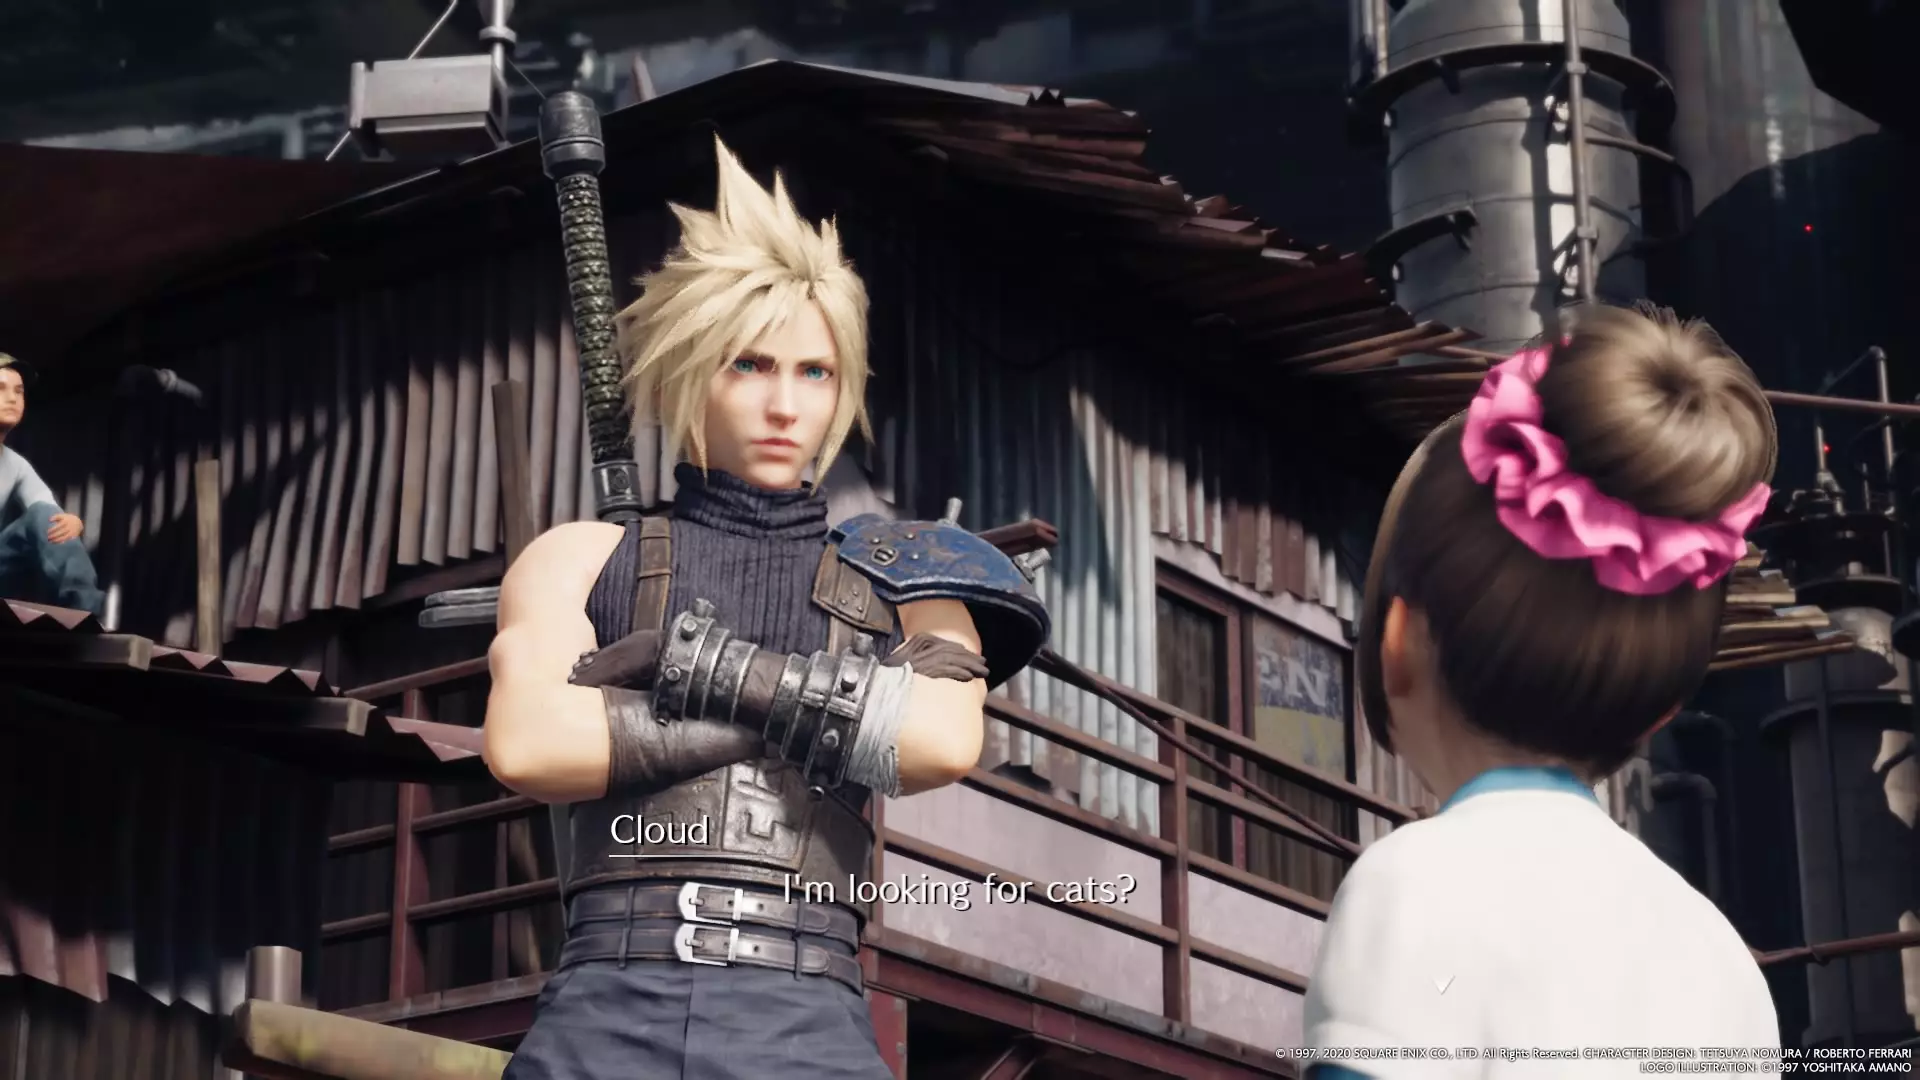 Cloud speaking to an NPC, about cats /